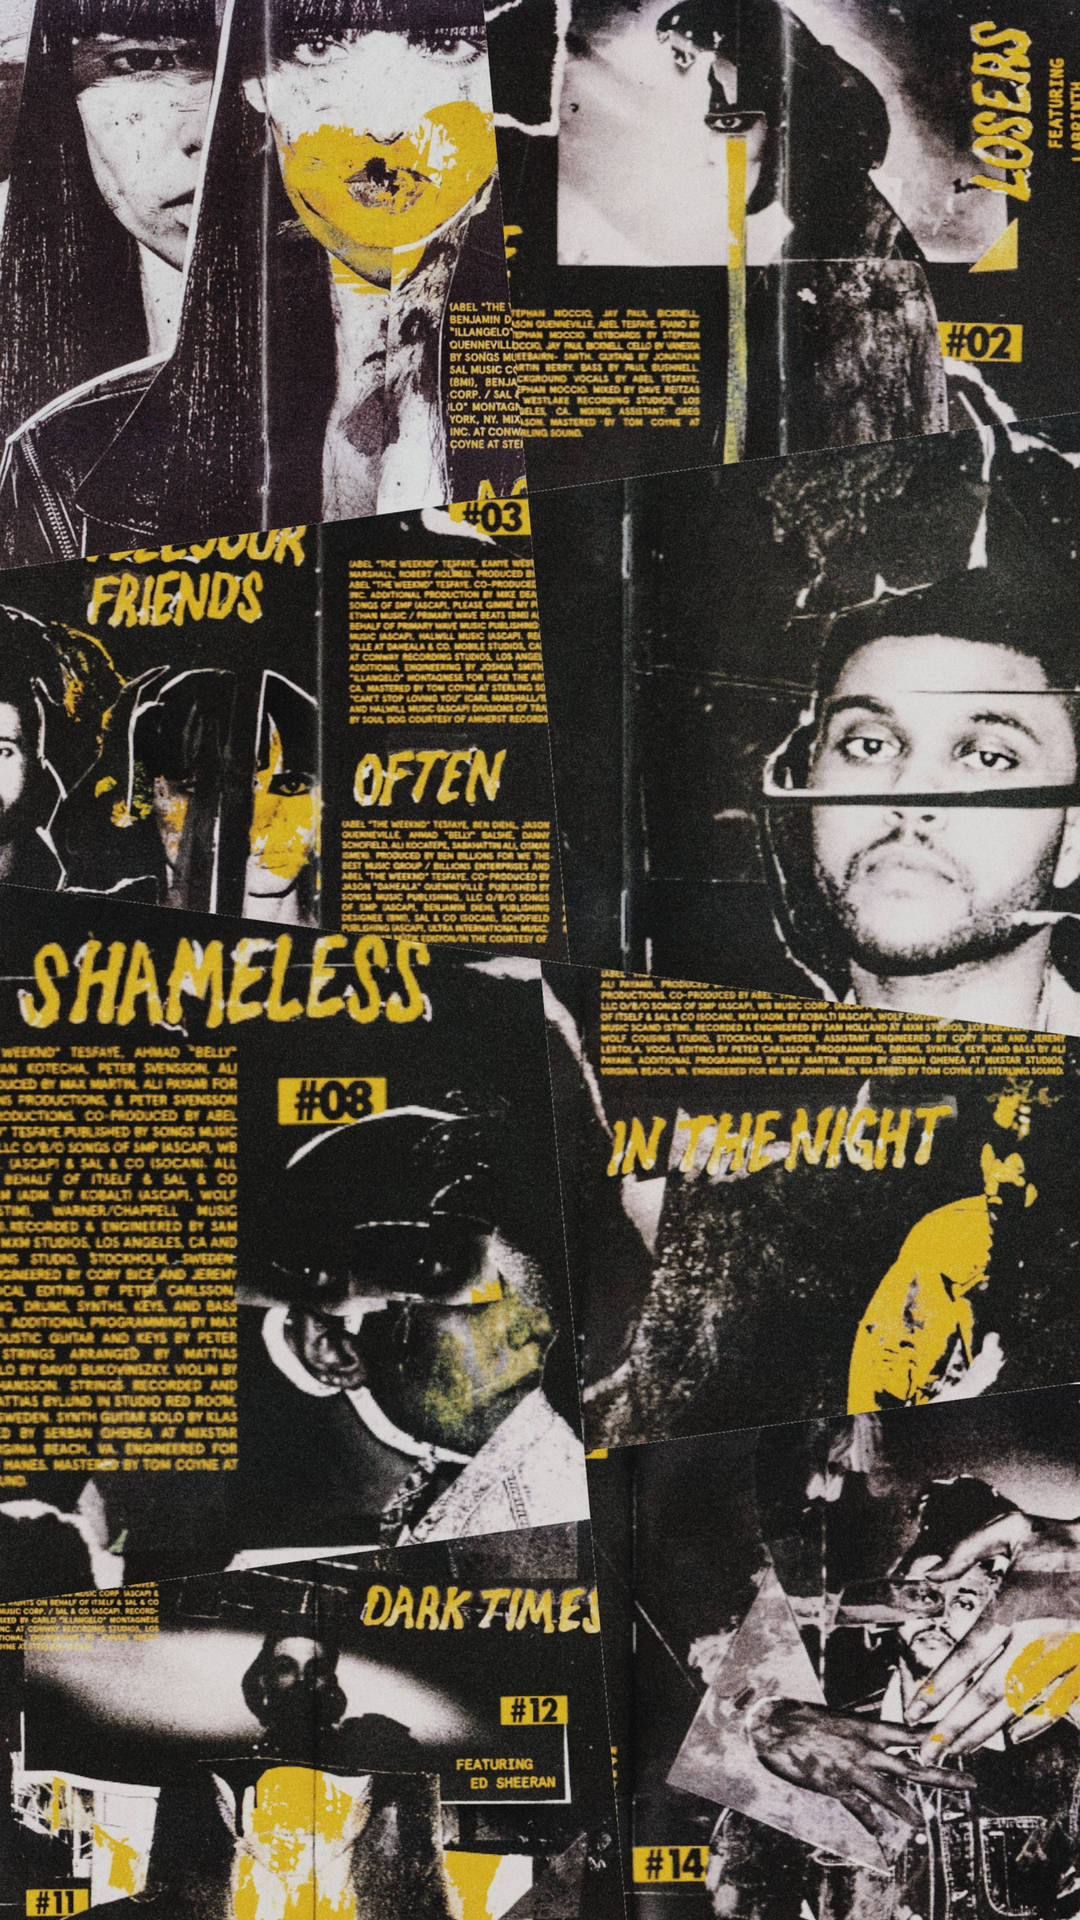 The Weeknd Beauty Behind The Madness Background